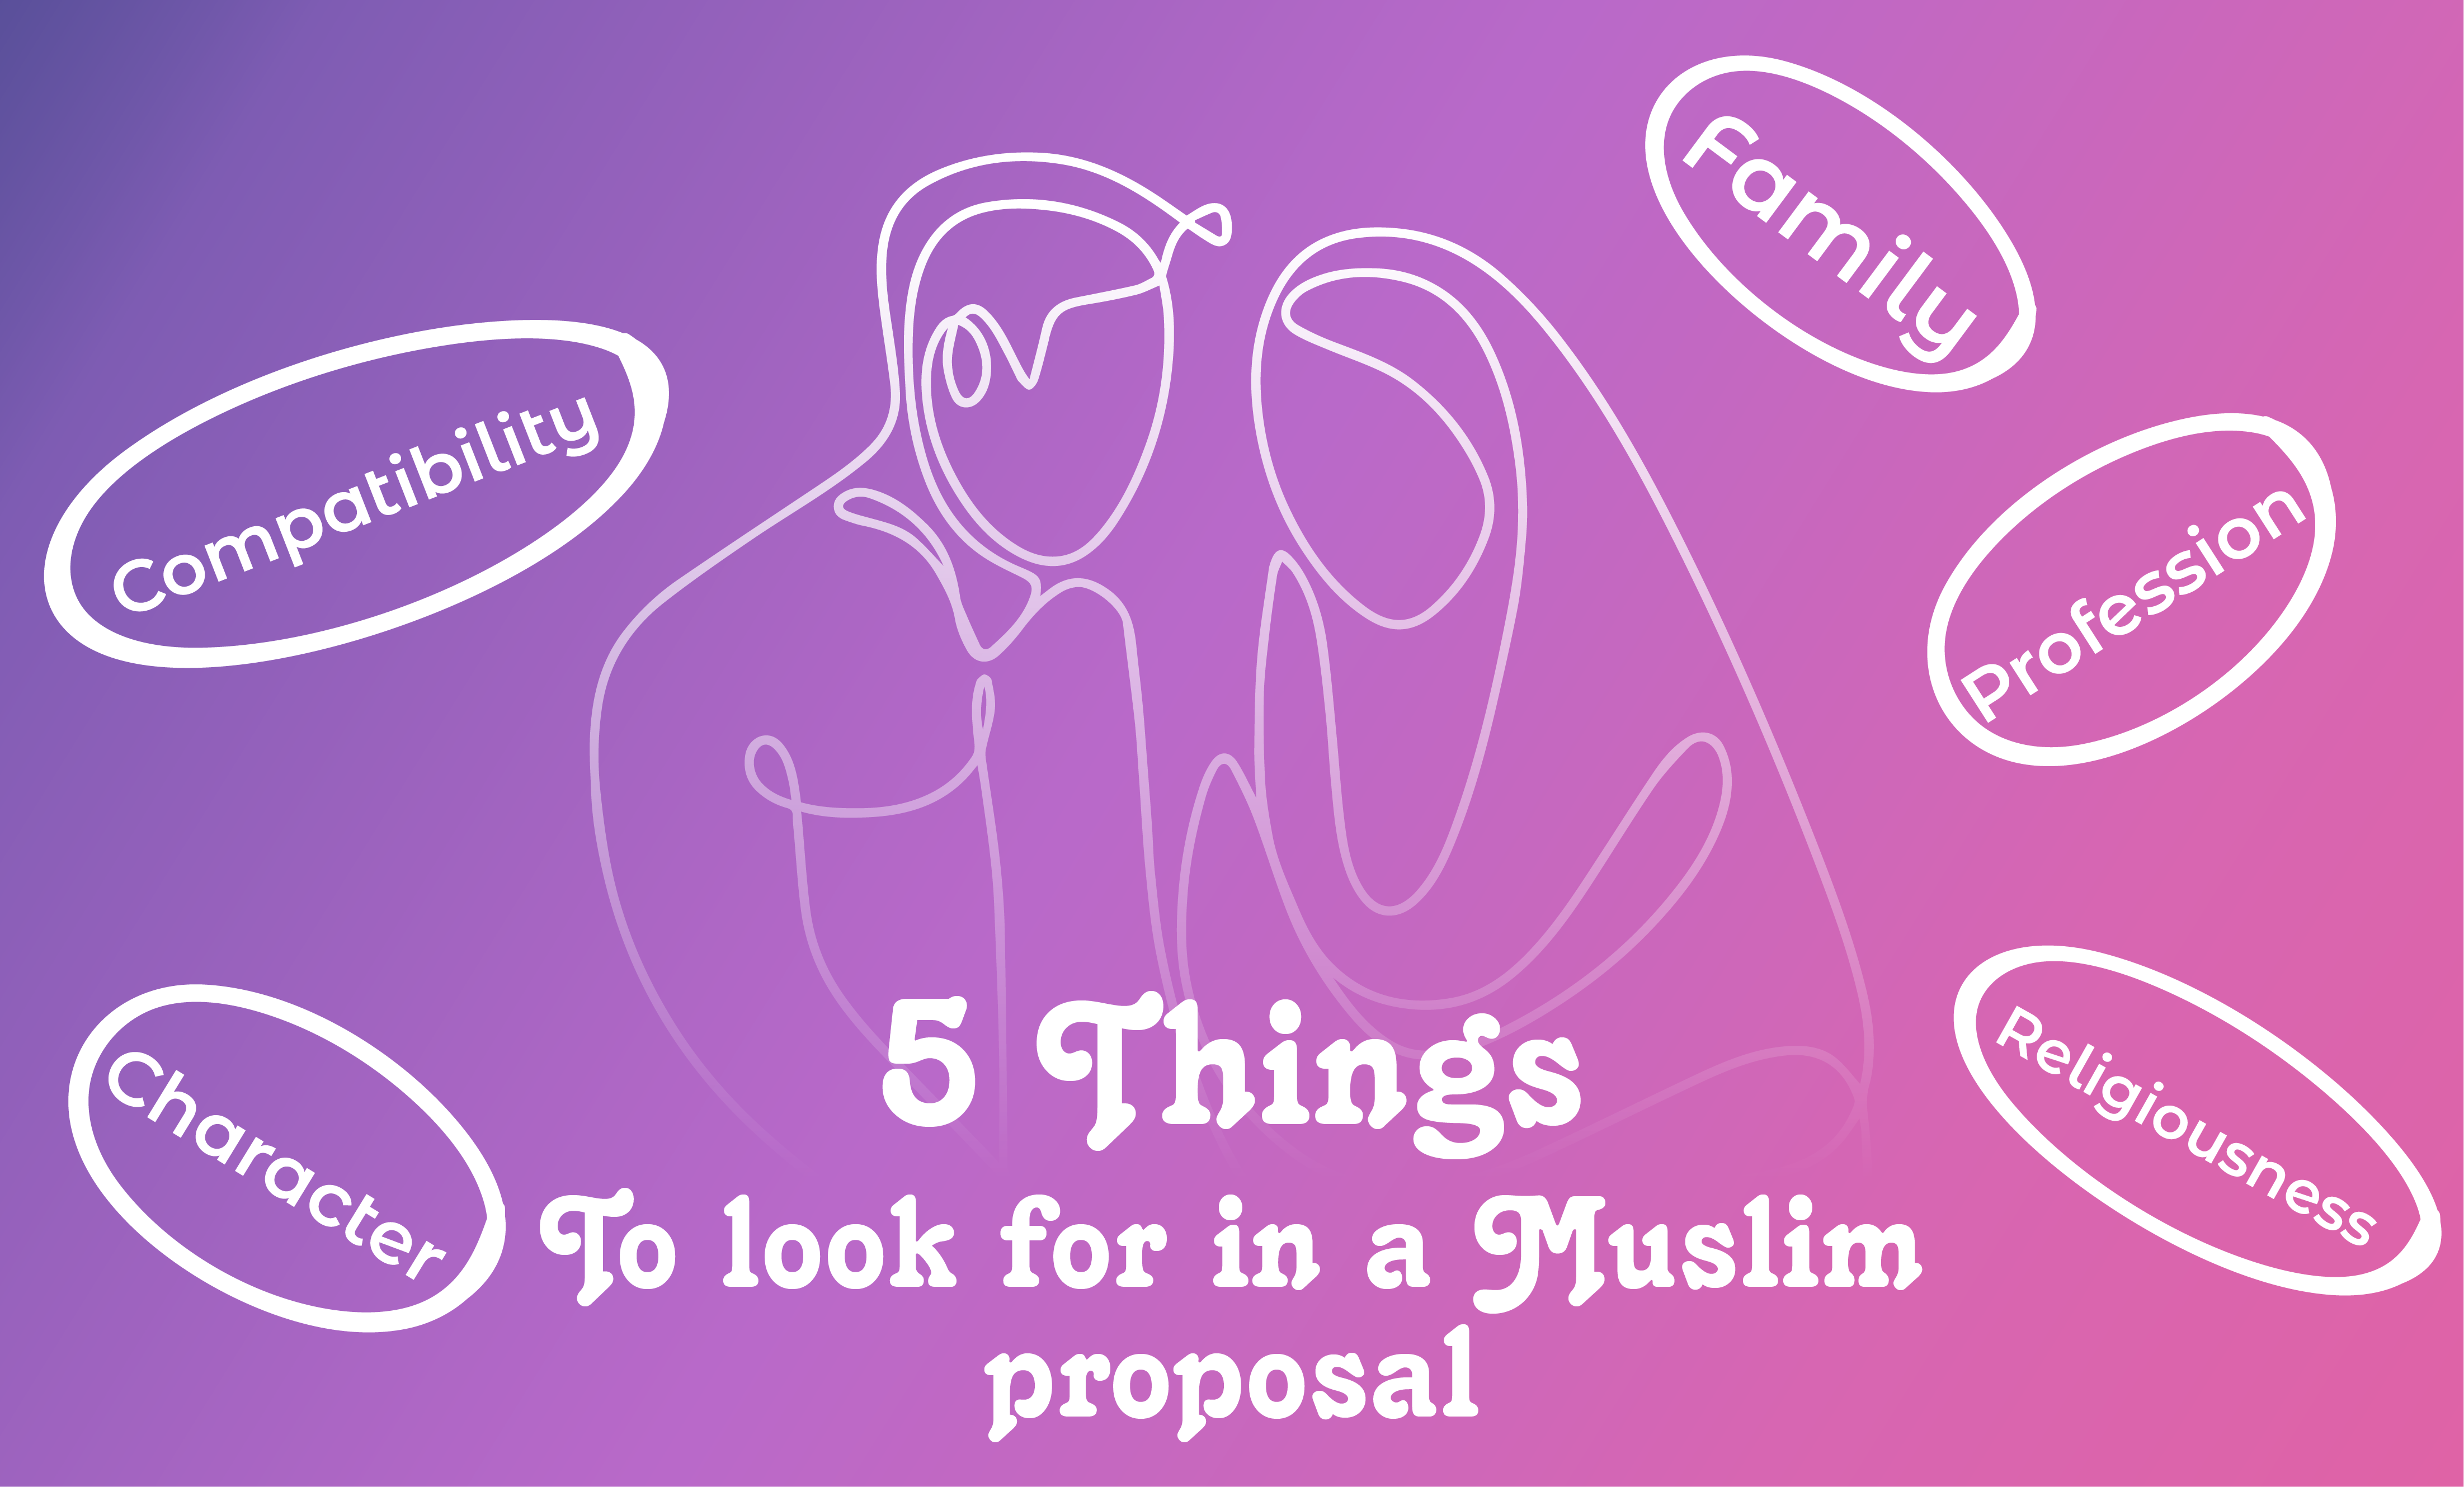 5 things to look for in a Muslim proposal for a successful marriage in an Islamic way